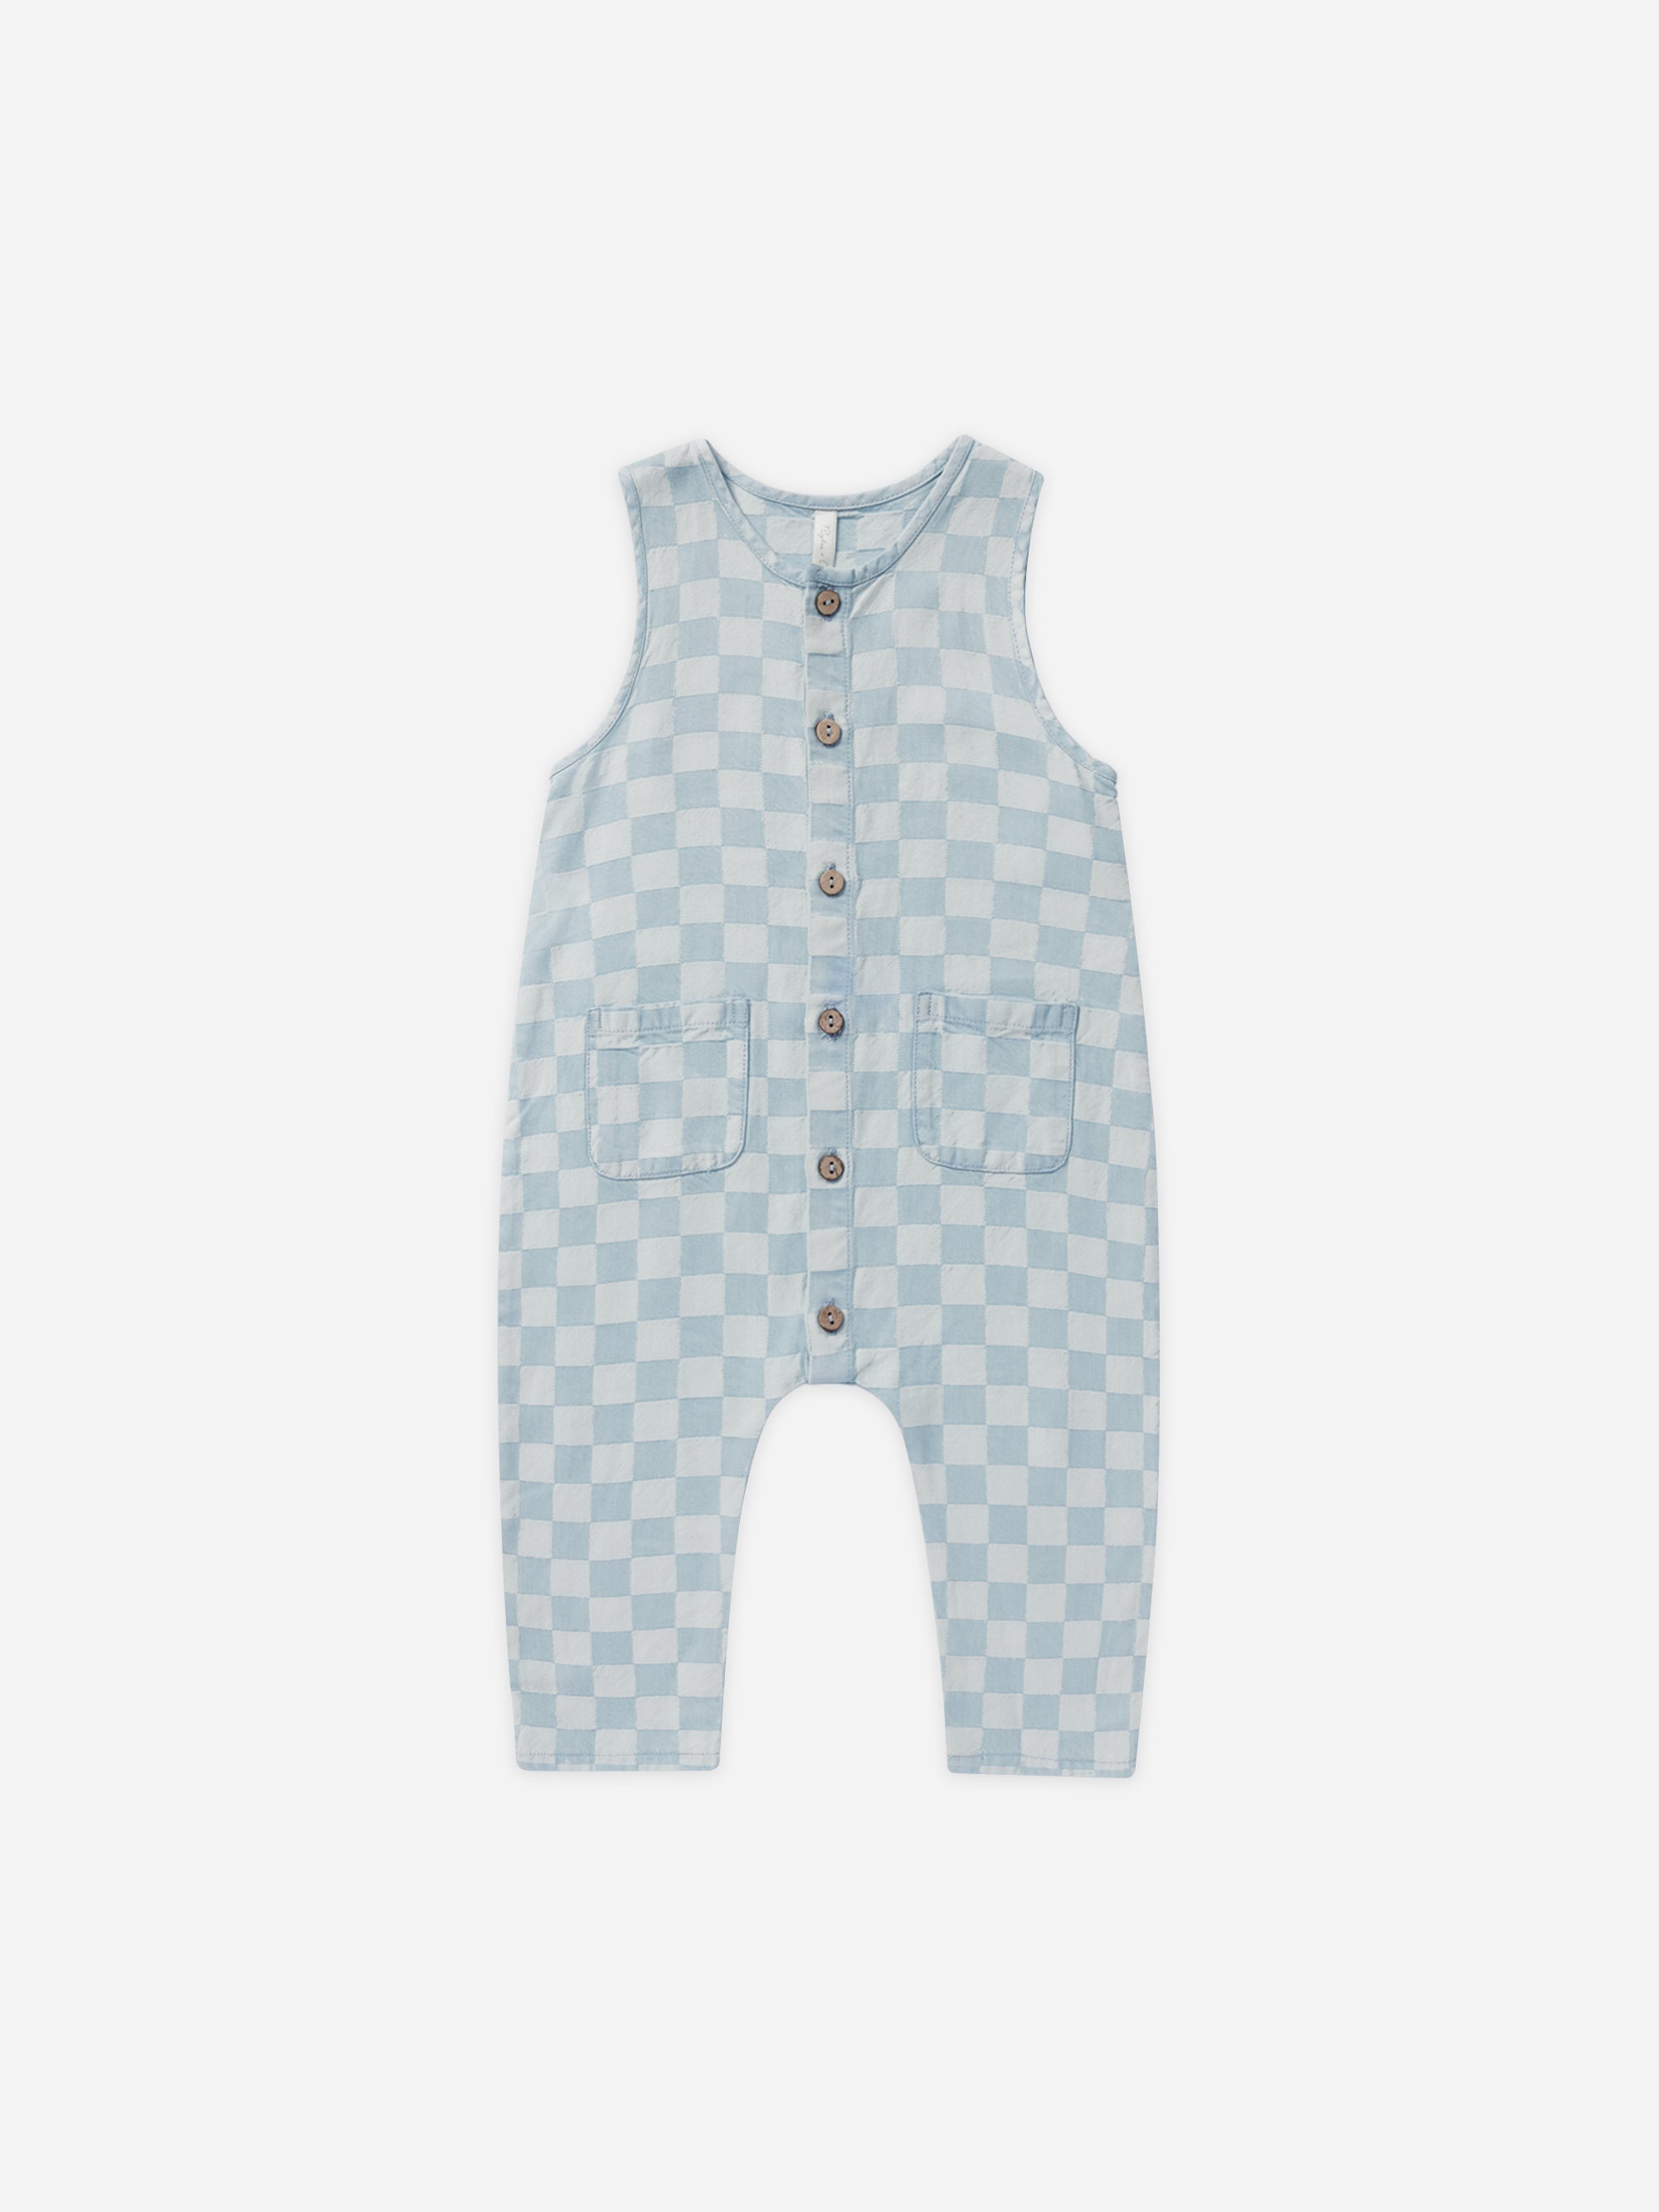 Woven Jumpsuit || Blue Check - Rylee + Cru | Kids Clothes | Trendy Baby Clothes | Modern Infant Outfits |